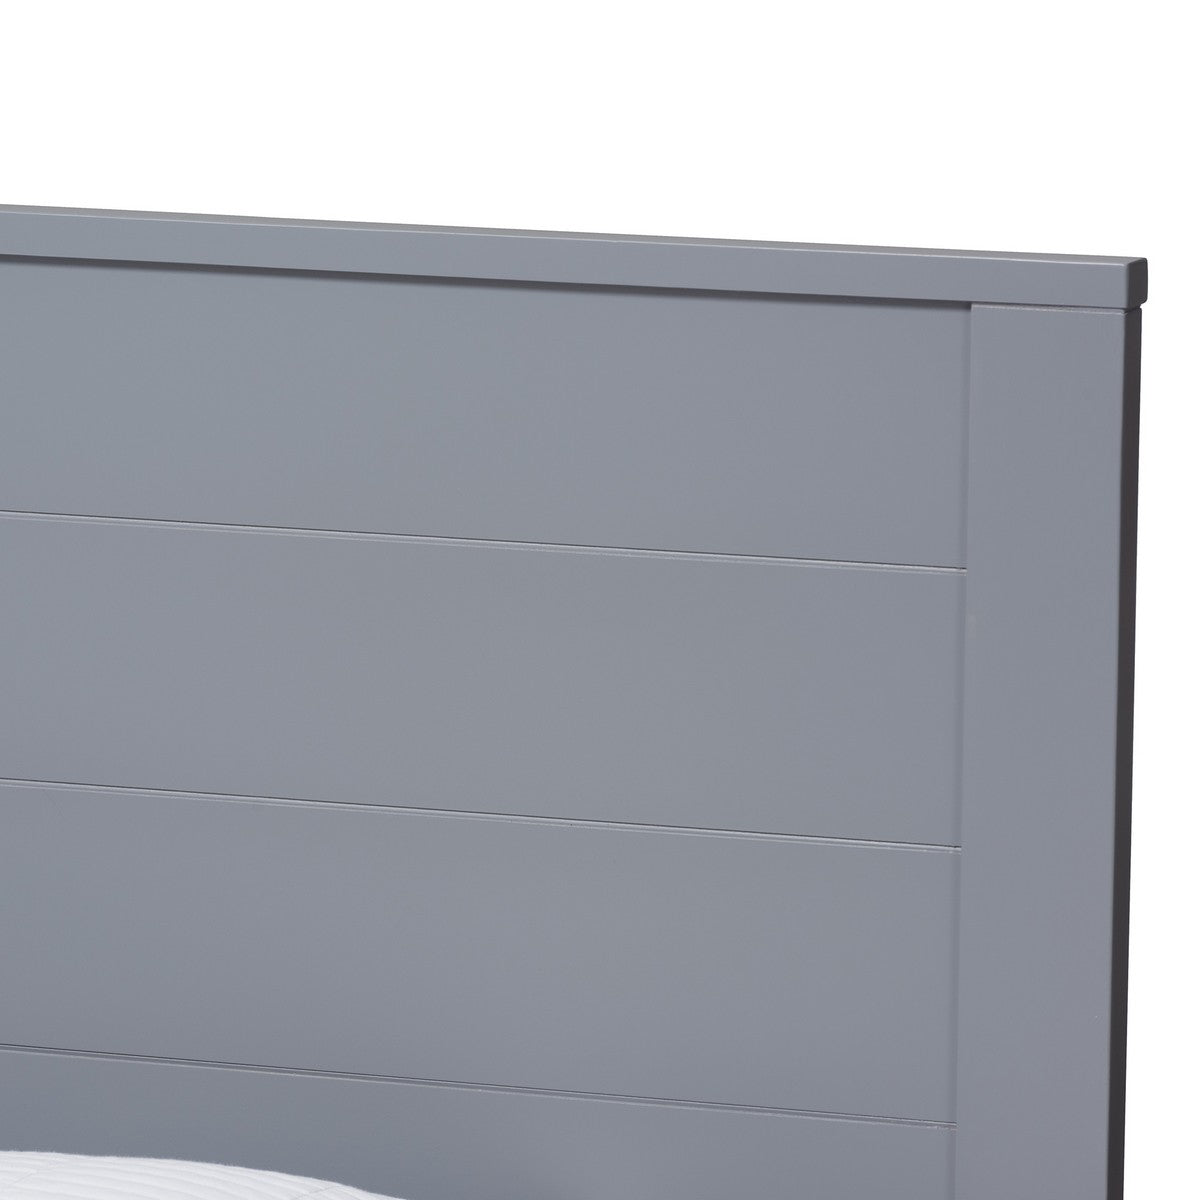 Baxton Studio Catalina Modern Classic Mission Style Grey-Finished Wood Twin Platform Bed with Trundle